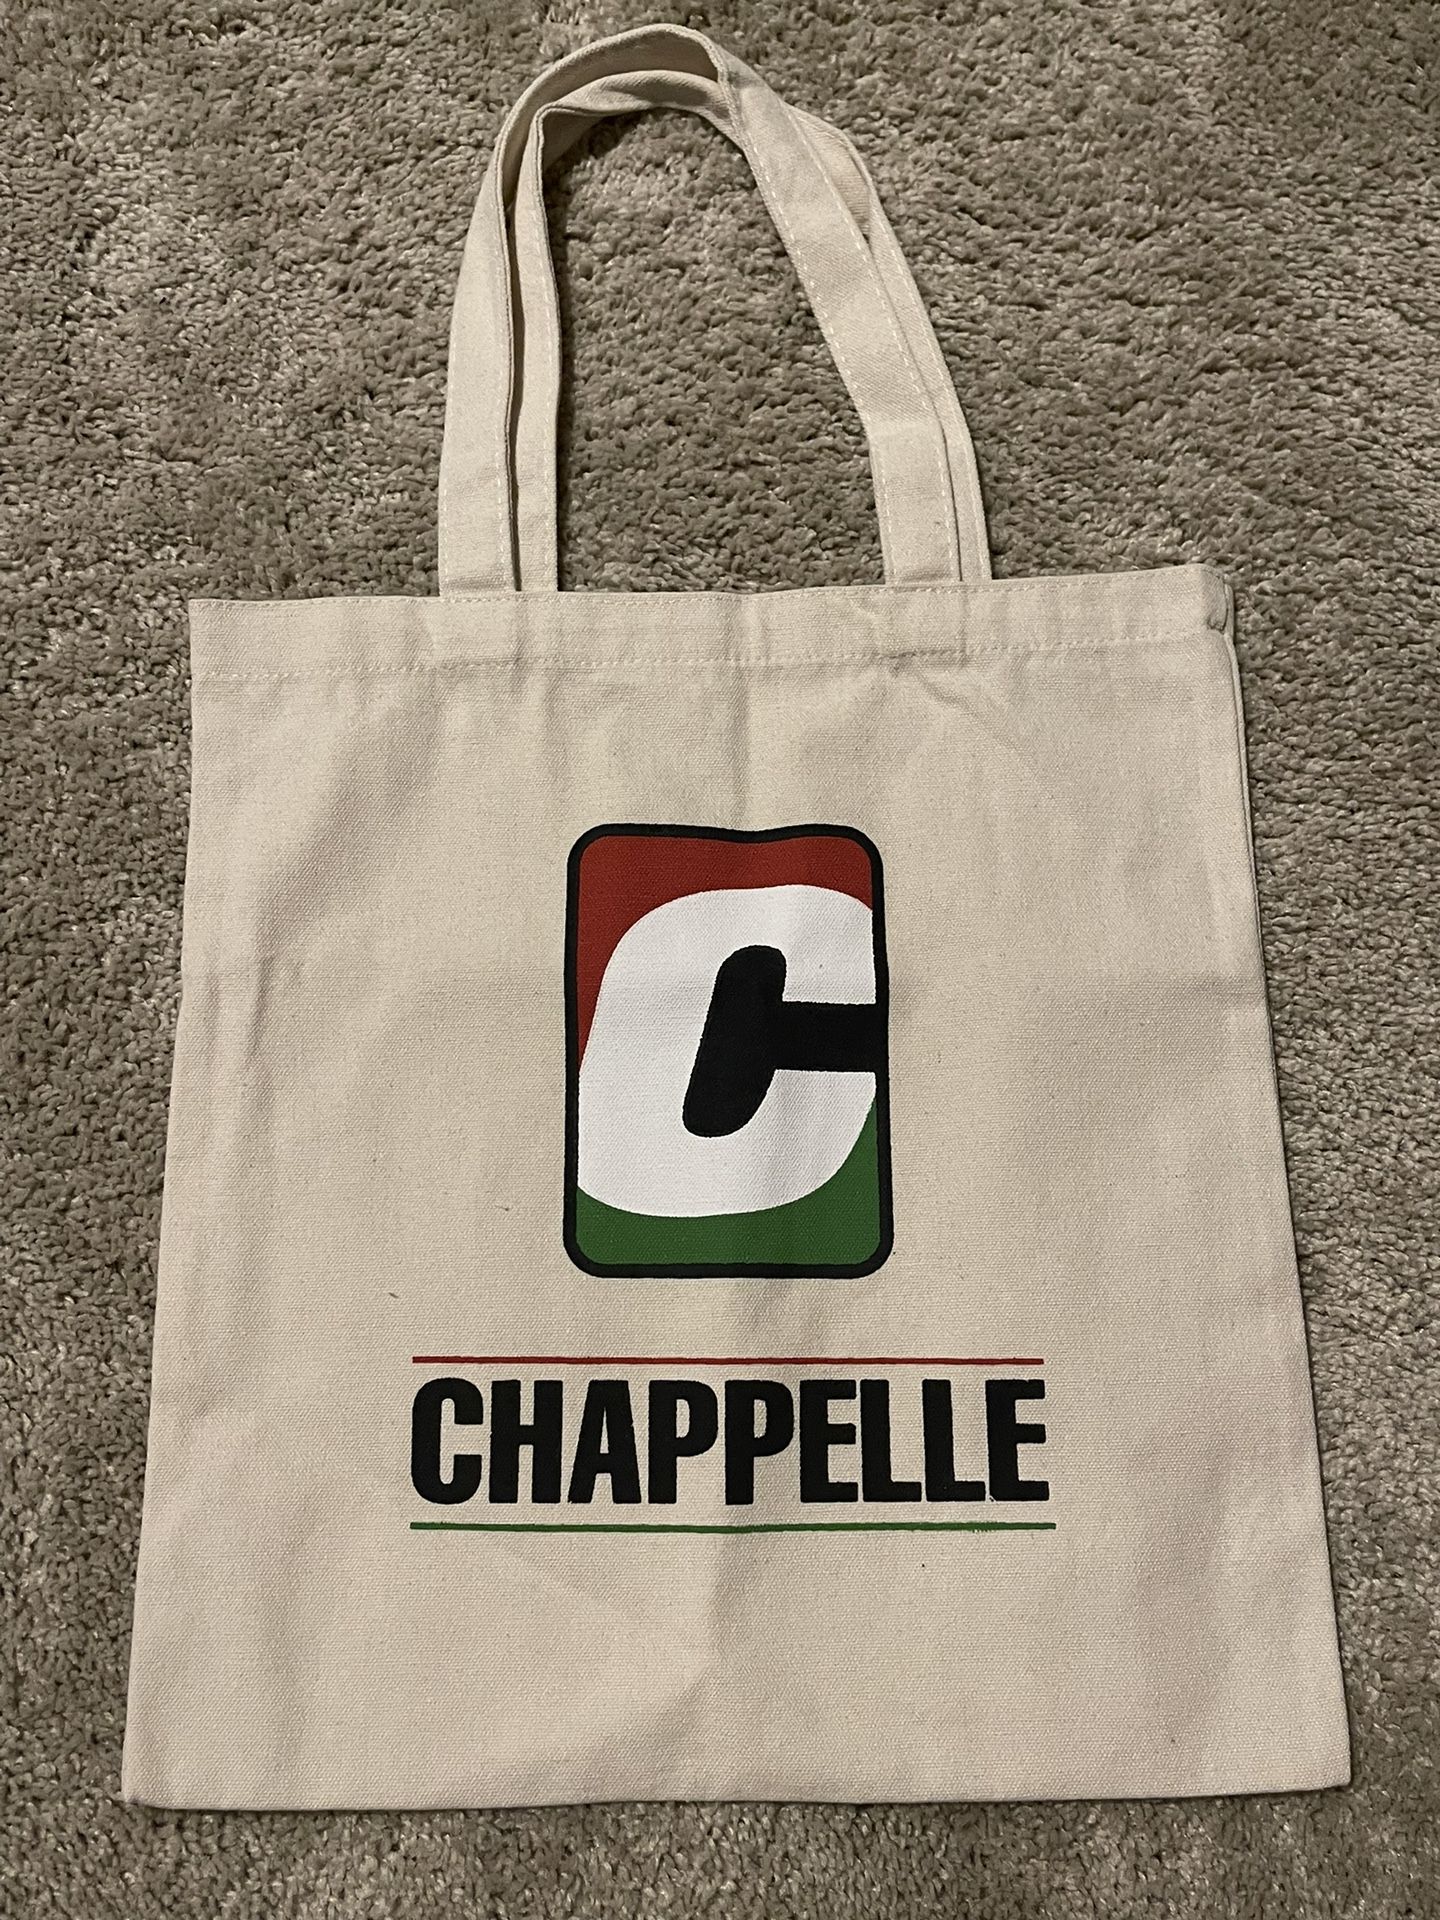 Dave Chappelle Tote Bag